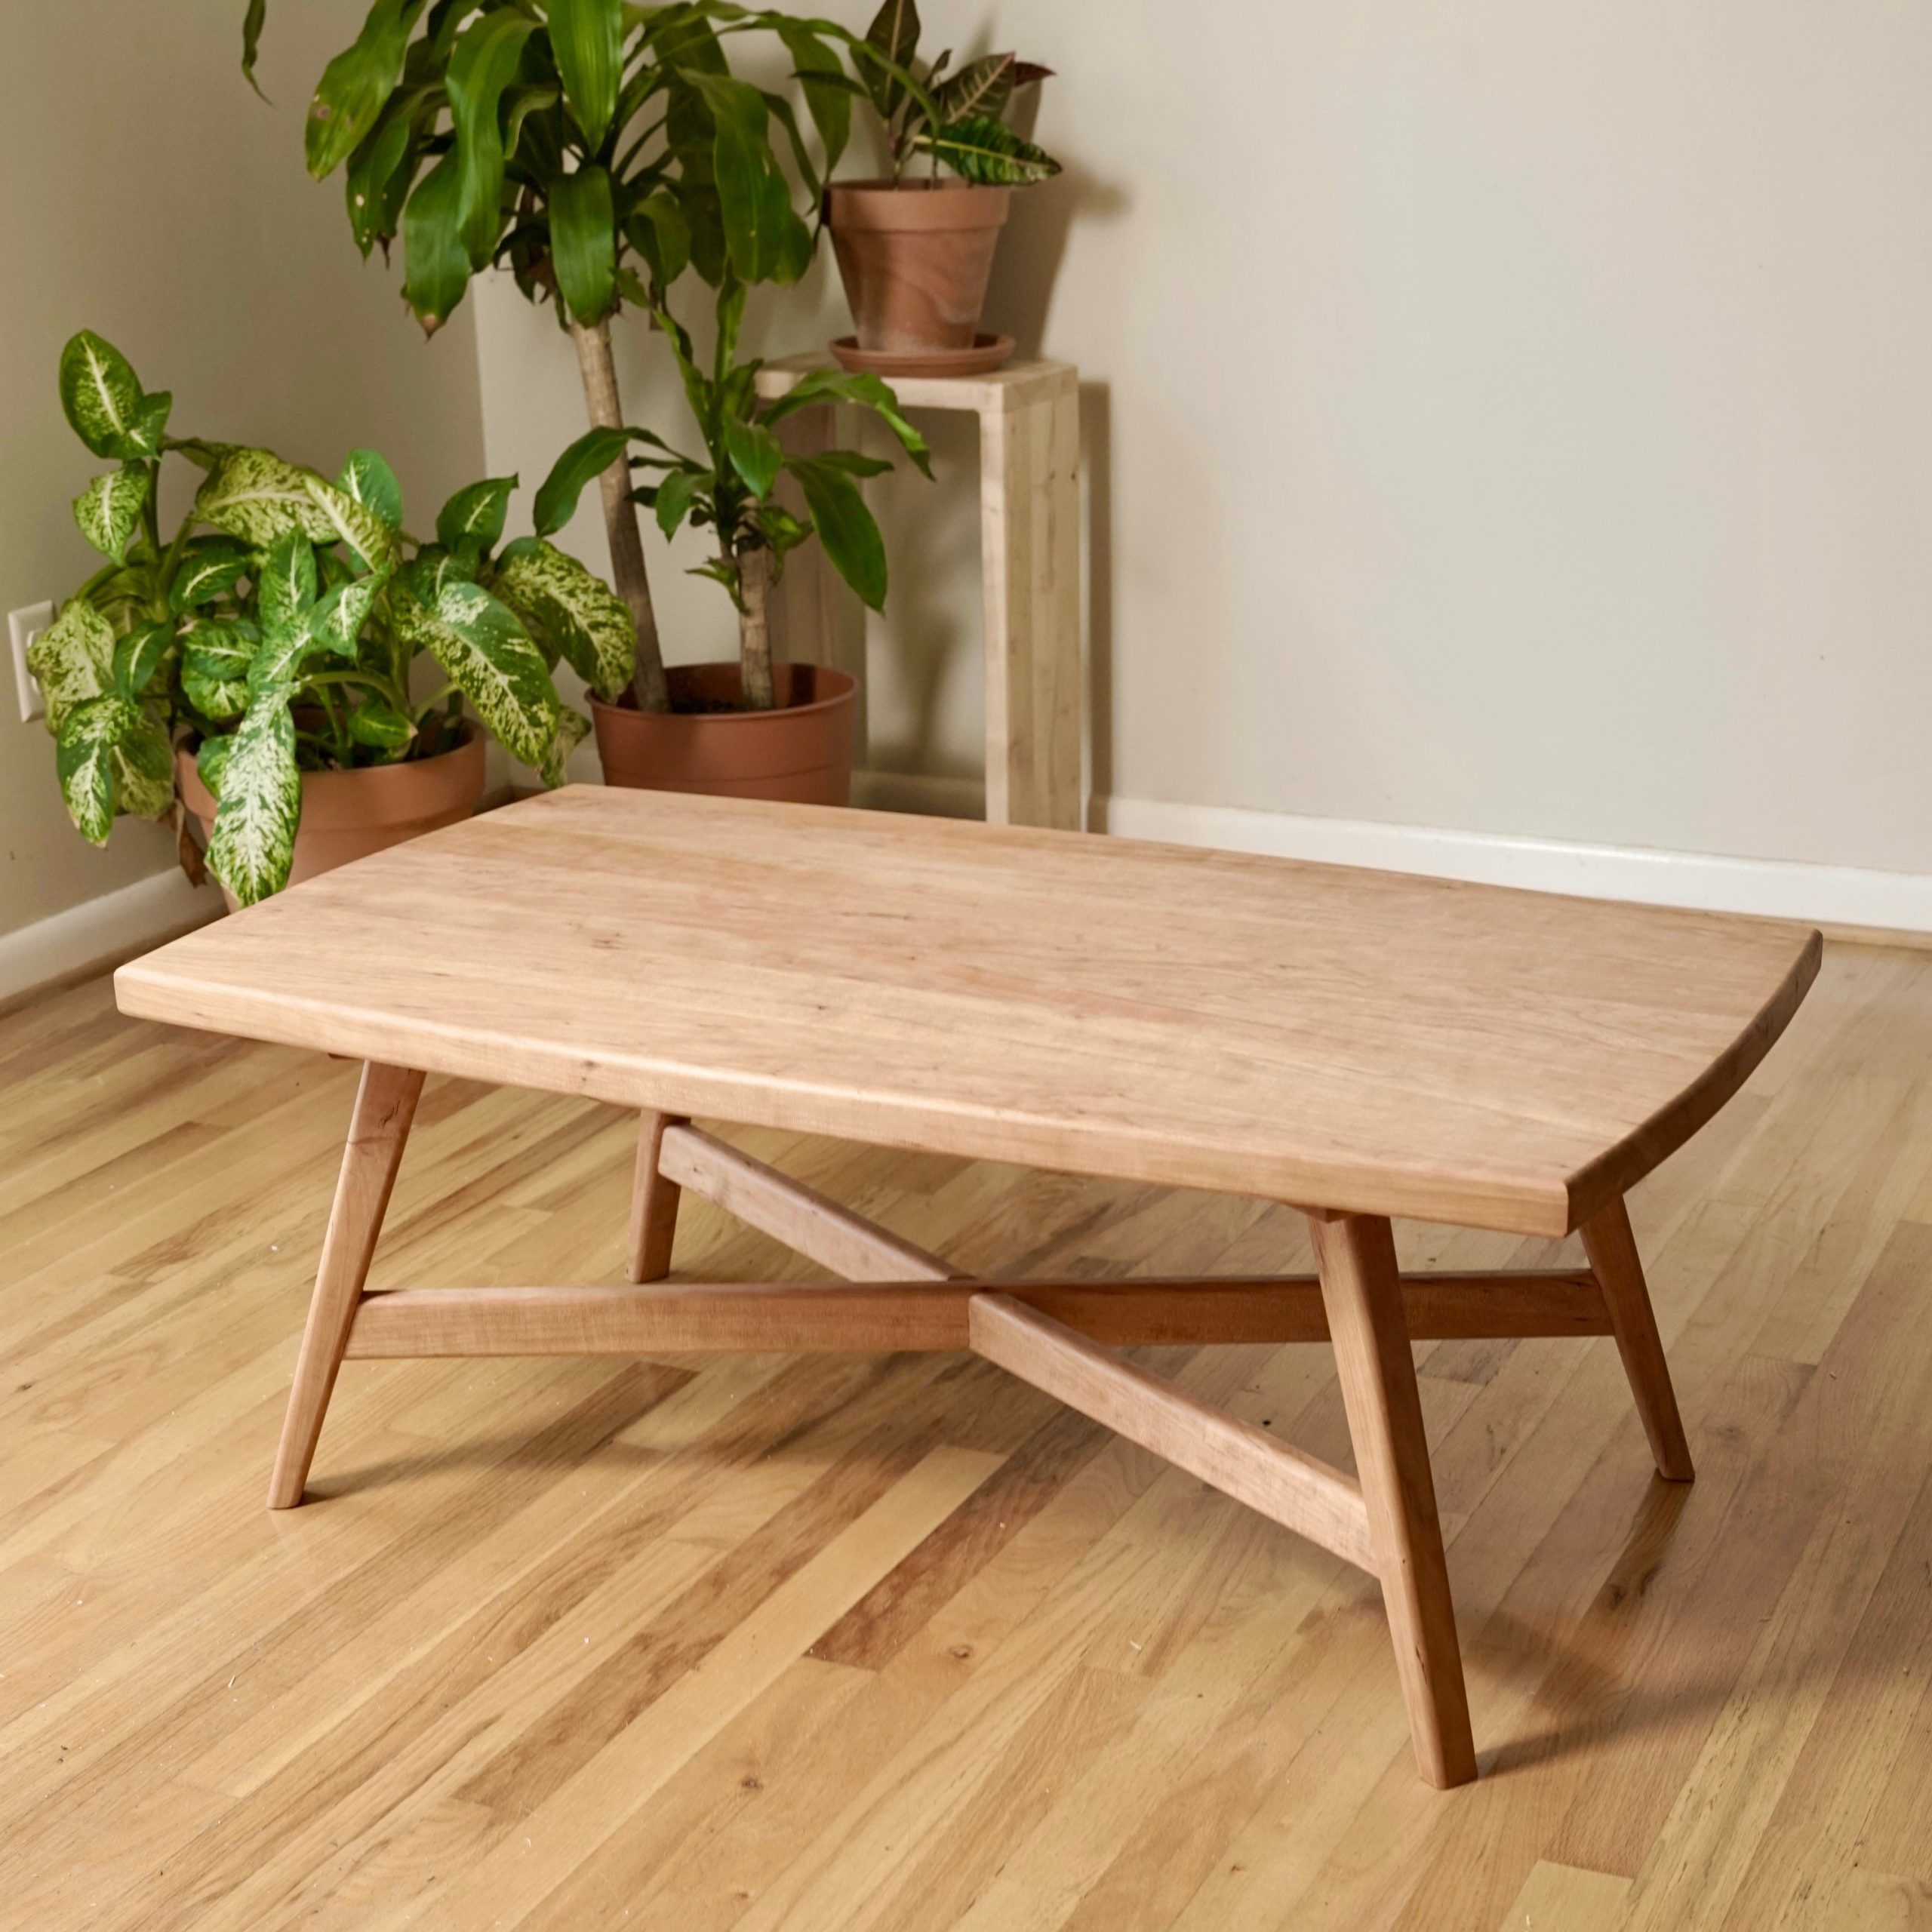 Scandinavian Coffee Table Cherry Coffee Table Maple Coffee – Etsy Denmark Intended For Scandinavian Coffee Tables (View 4 of 20)